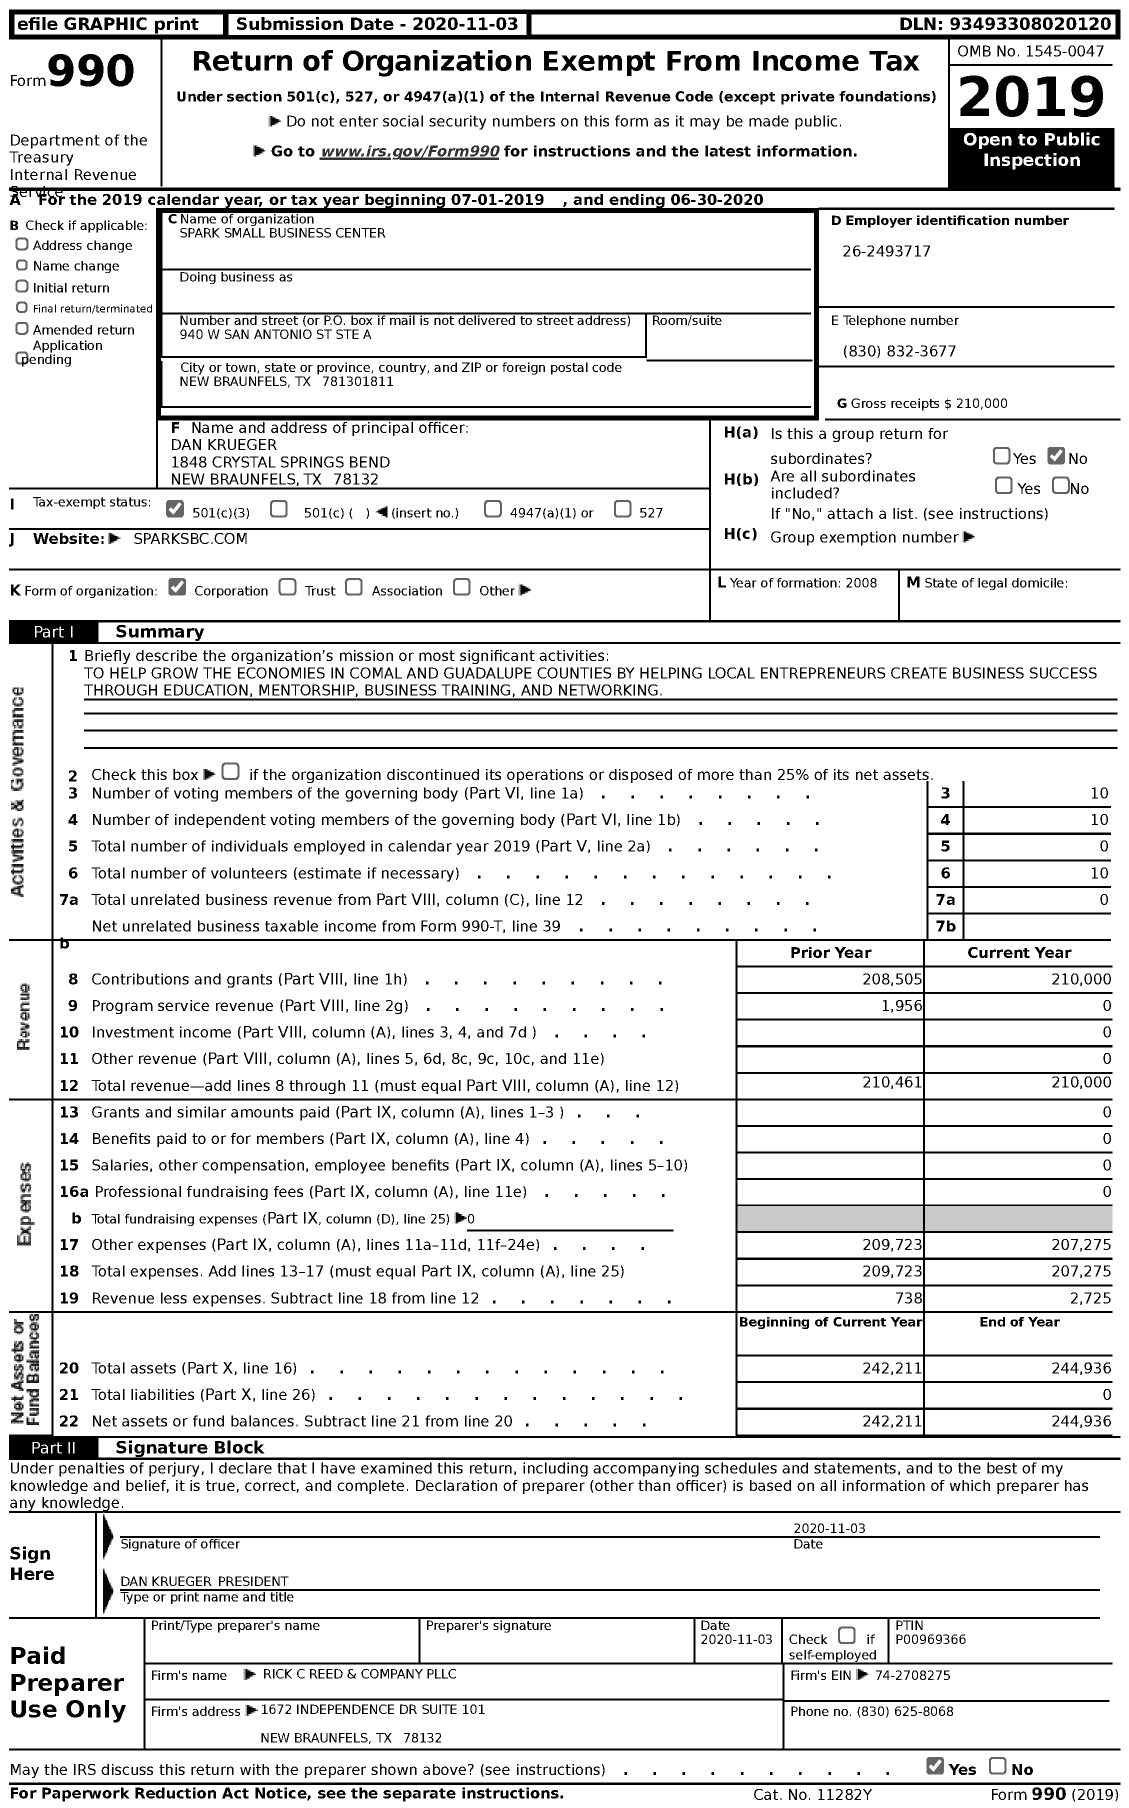 Image of first page of 2019 Form 990 for Spark Small Business Center